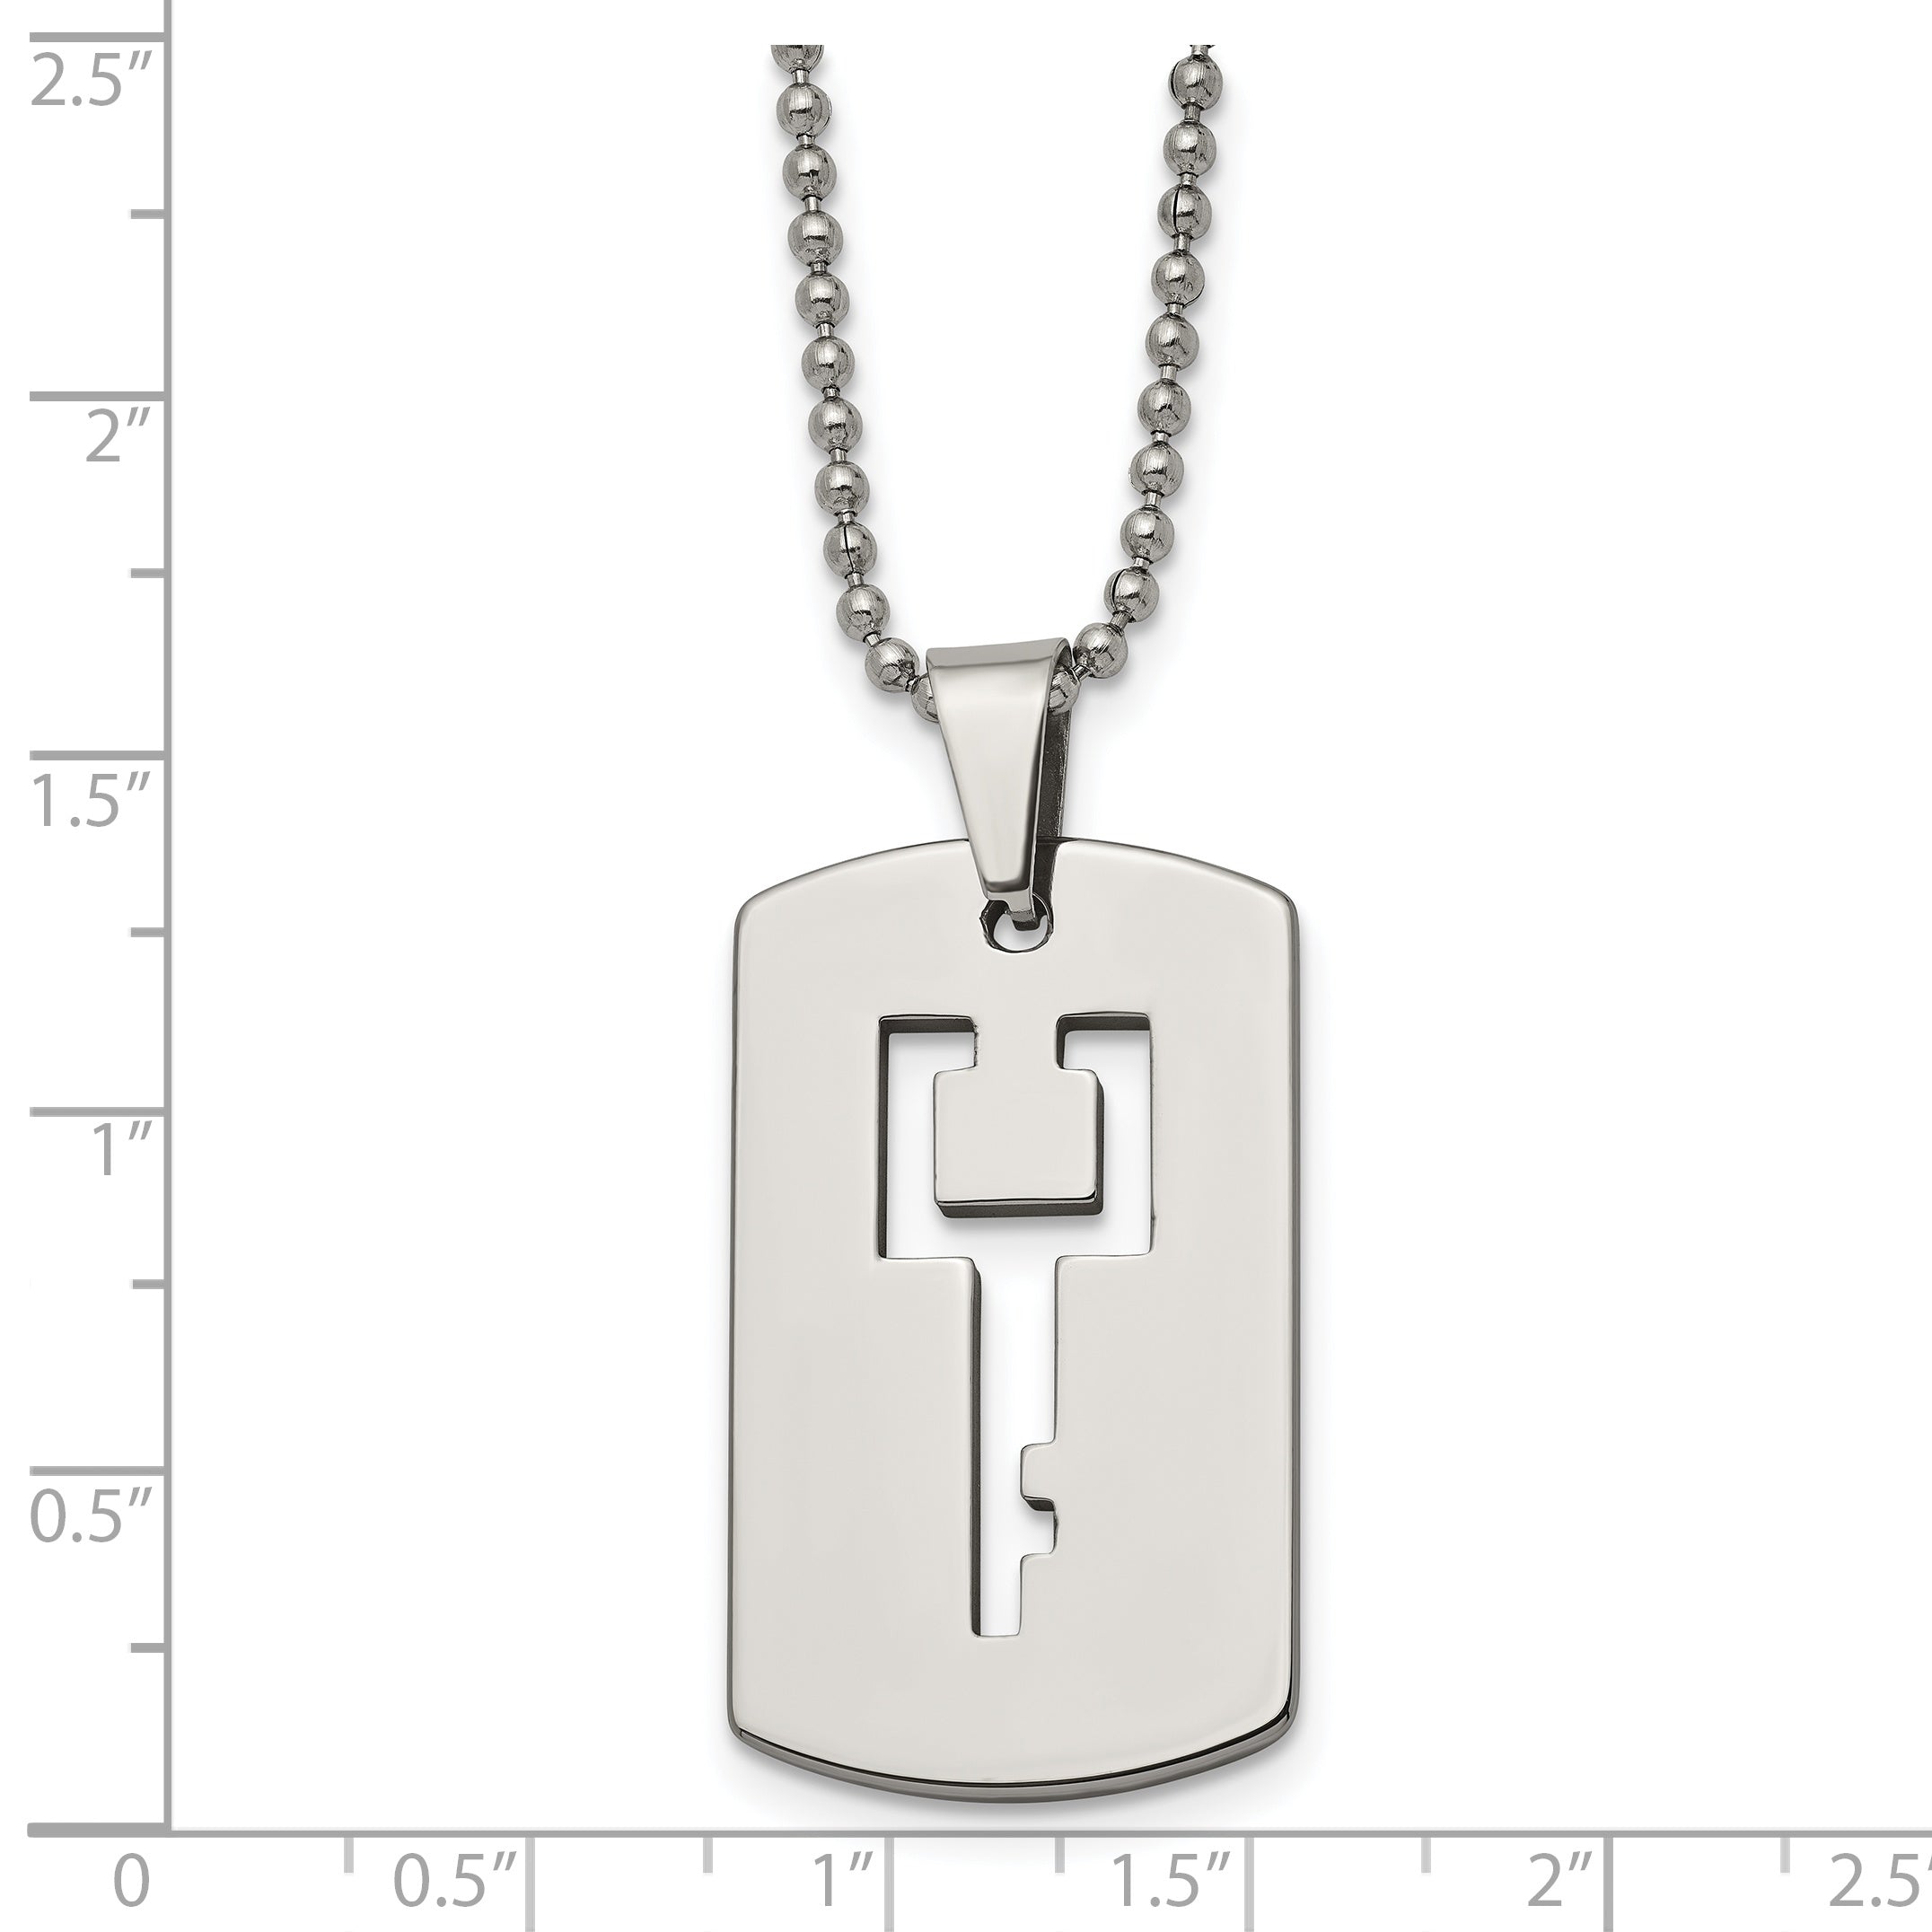 Chisel Tungsten Polished Dog Tag with Key Cut-out 22 inch Necklace